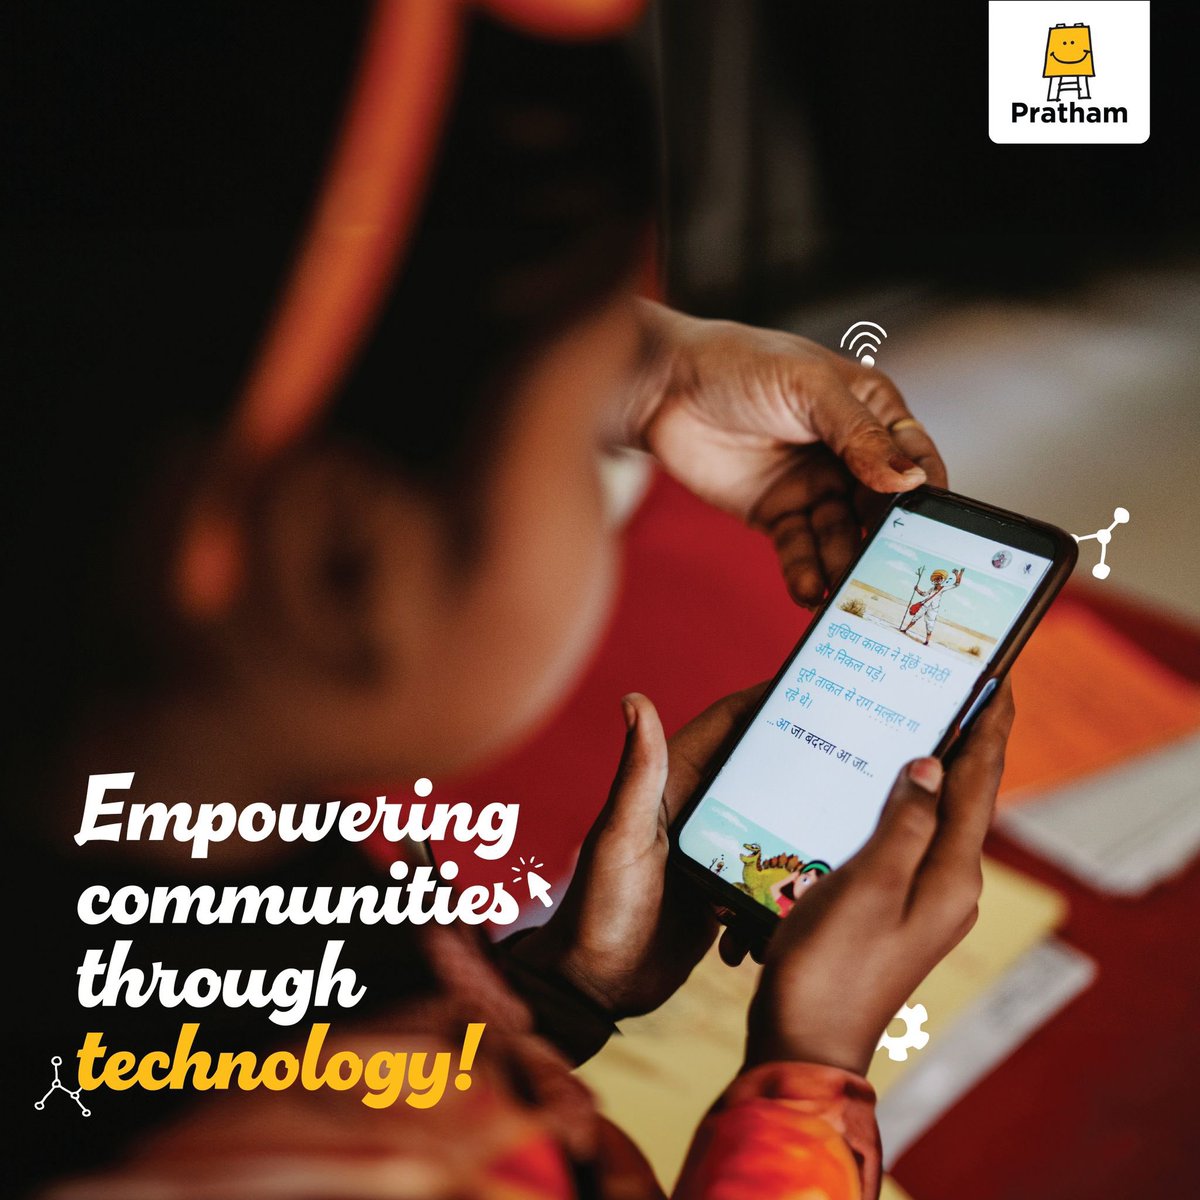 Pratham aims to modernize teaching, making it more engaging and interactive for the digital age. Join us in celebrating #NationalTechnologyDay by exploring our digital initiatives that are shaping the future of education! To know more visit: pradigi.org